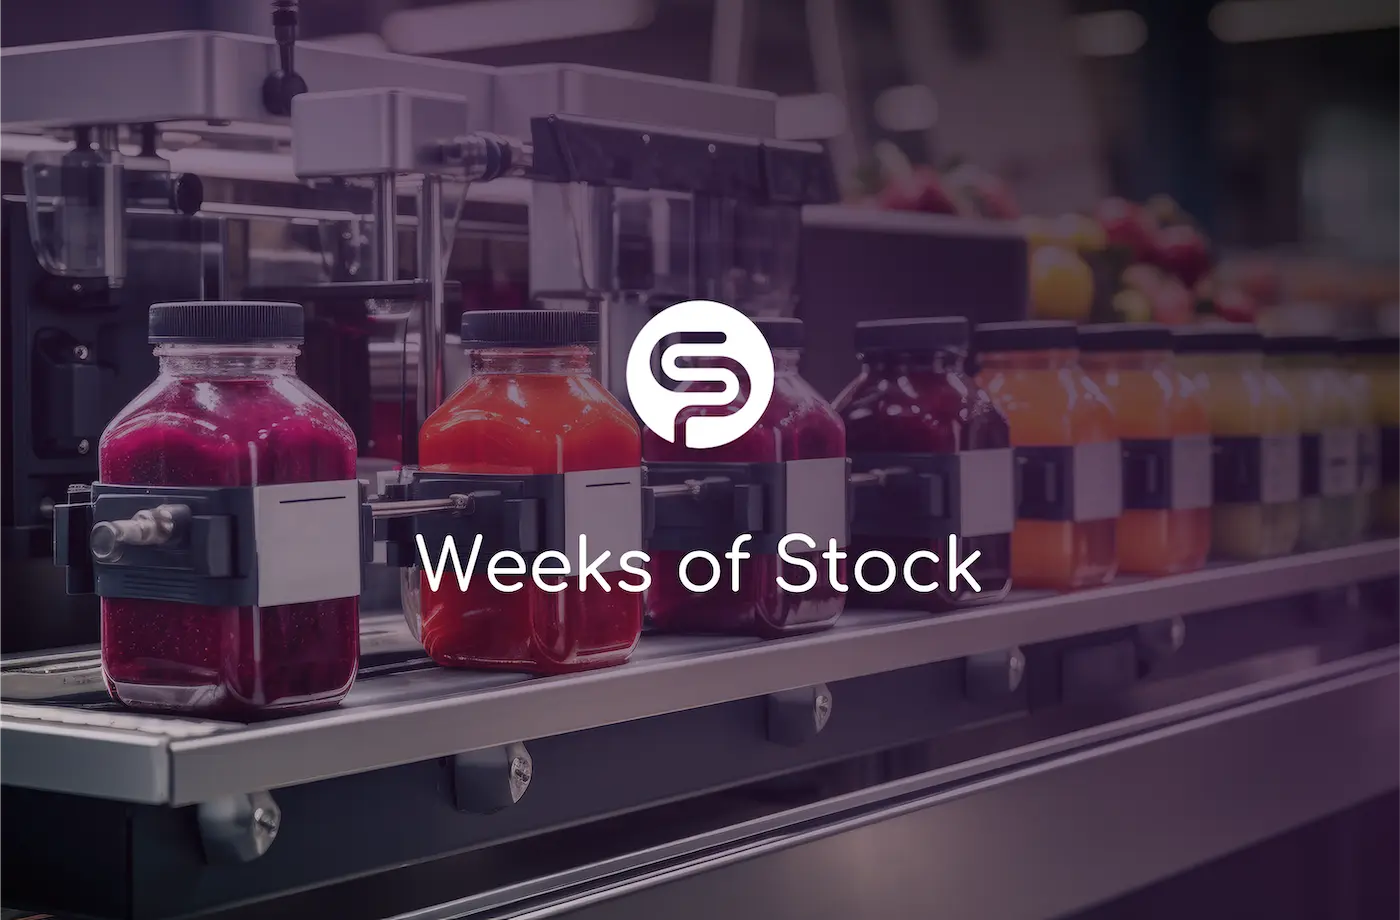 Weeks of Stock is a valuable metric for managing inventory, optimizing supply chain processes, and improving customer satisfaction by ensuring the right amount of stock is available.